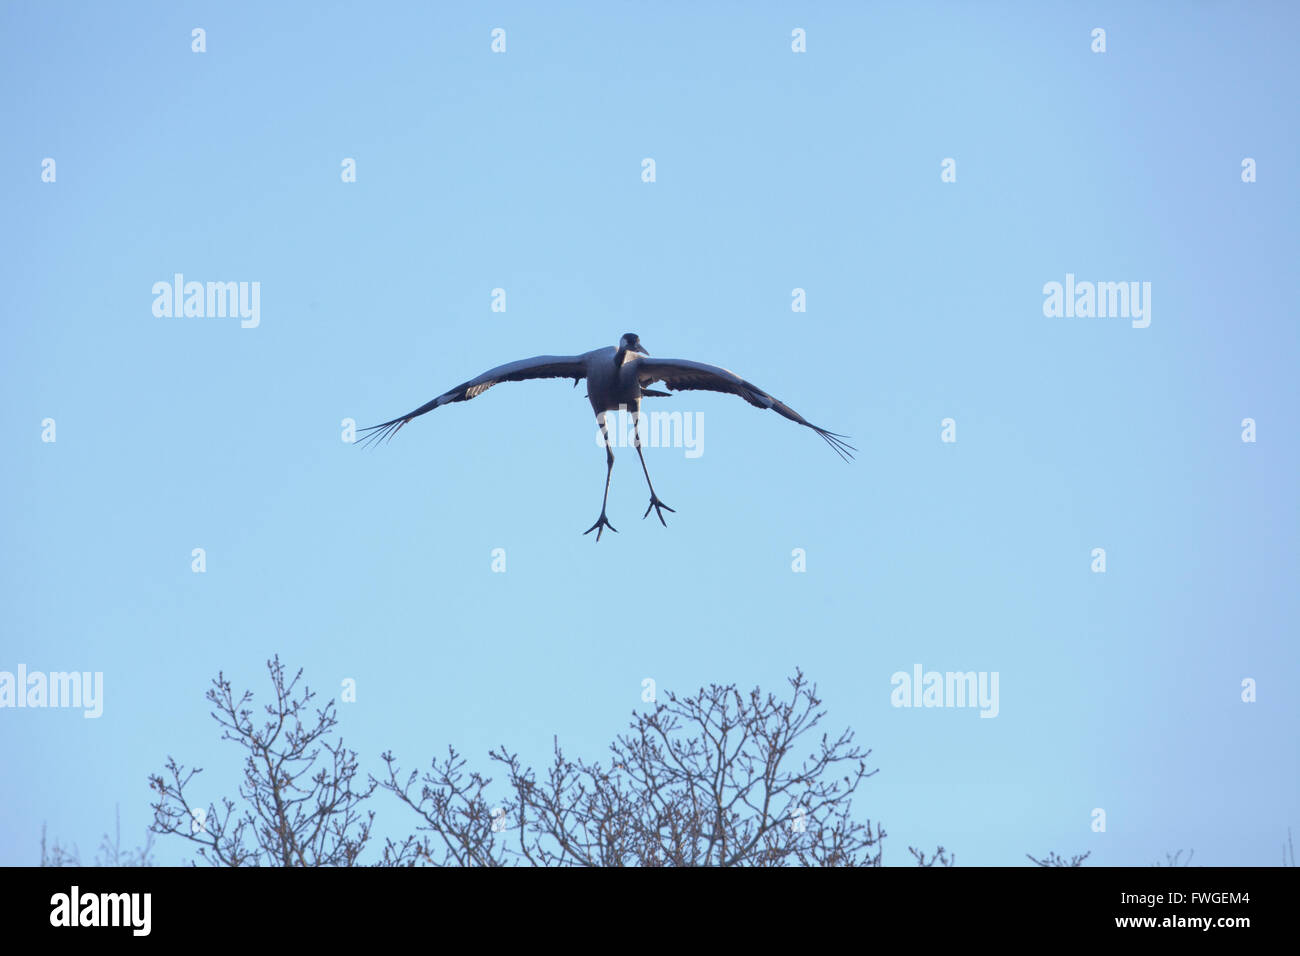 Common or Eurasian Crane (Grus grus). Approaching a landing area. About to alight. Stock Photo